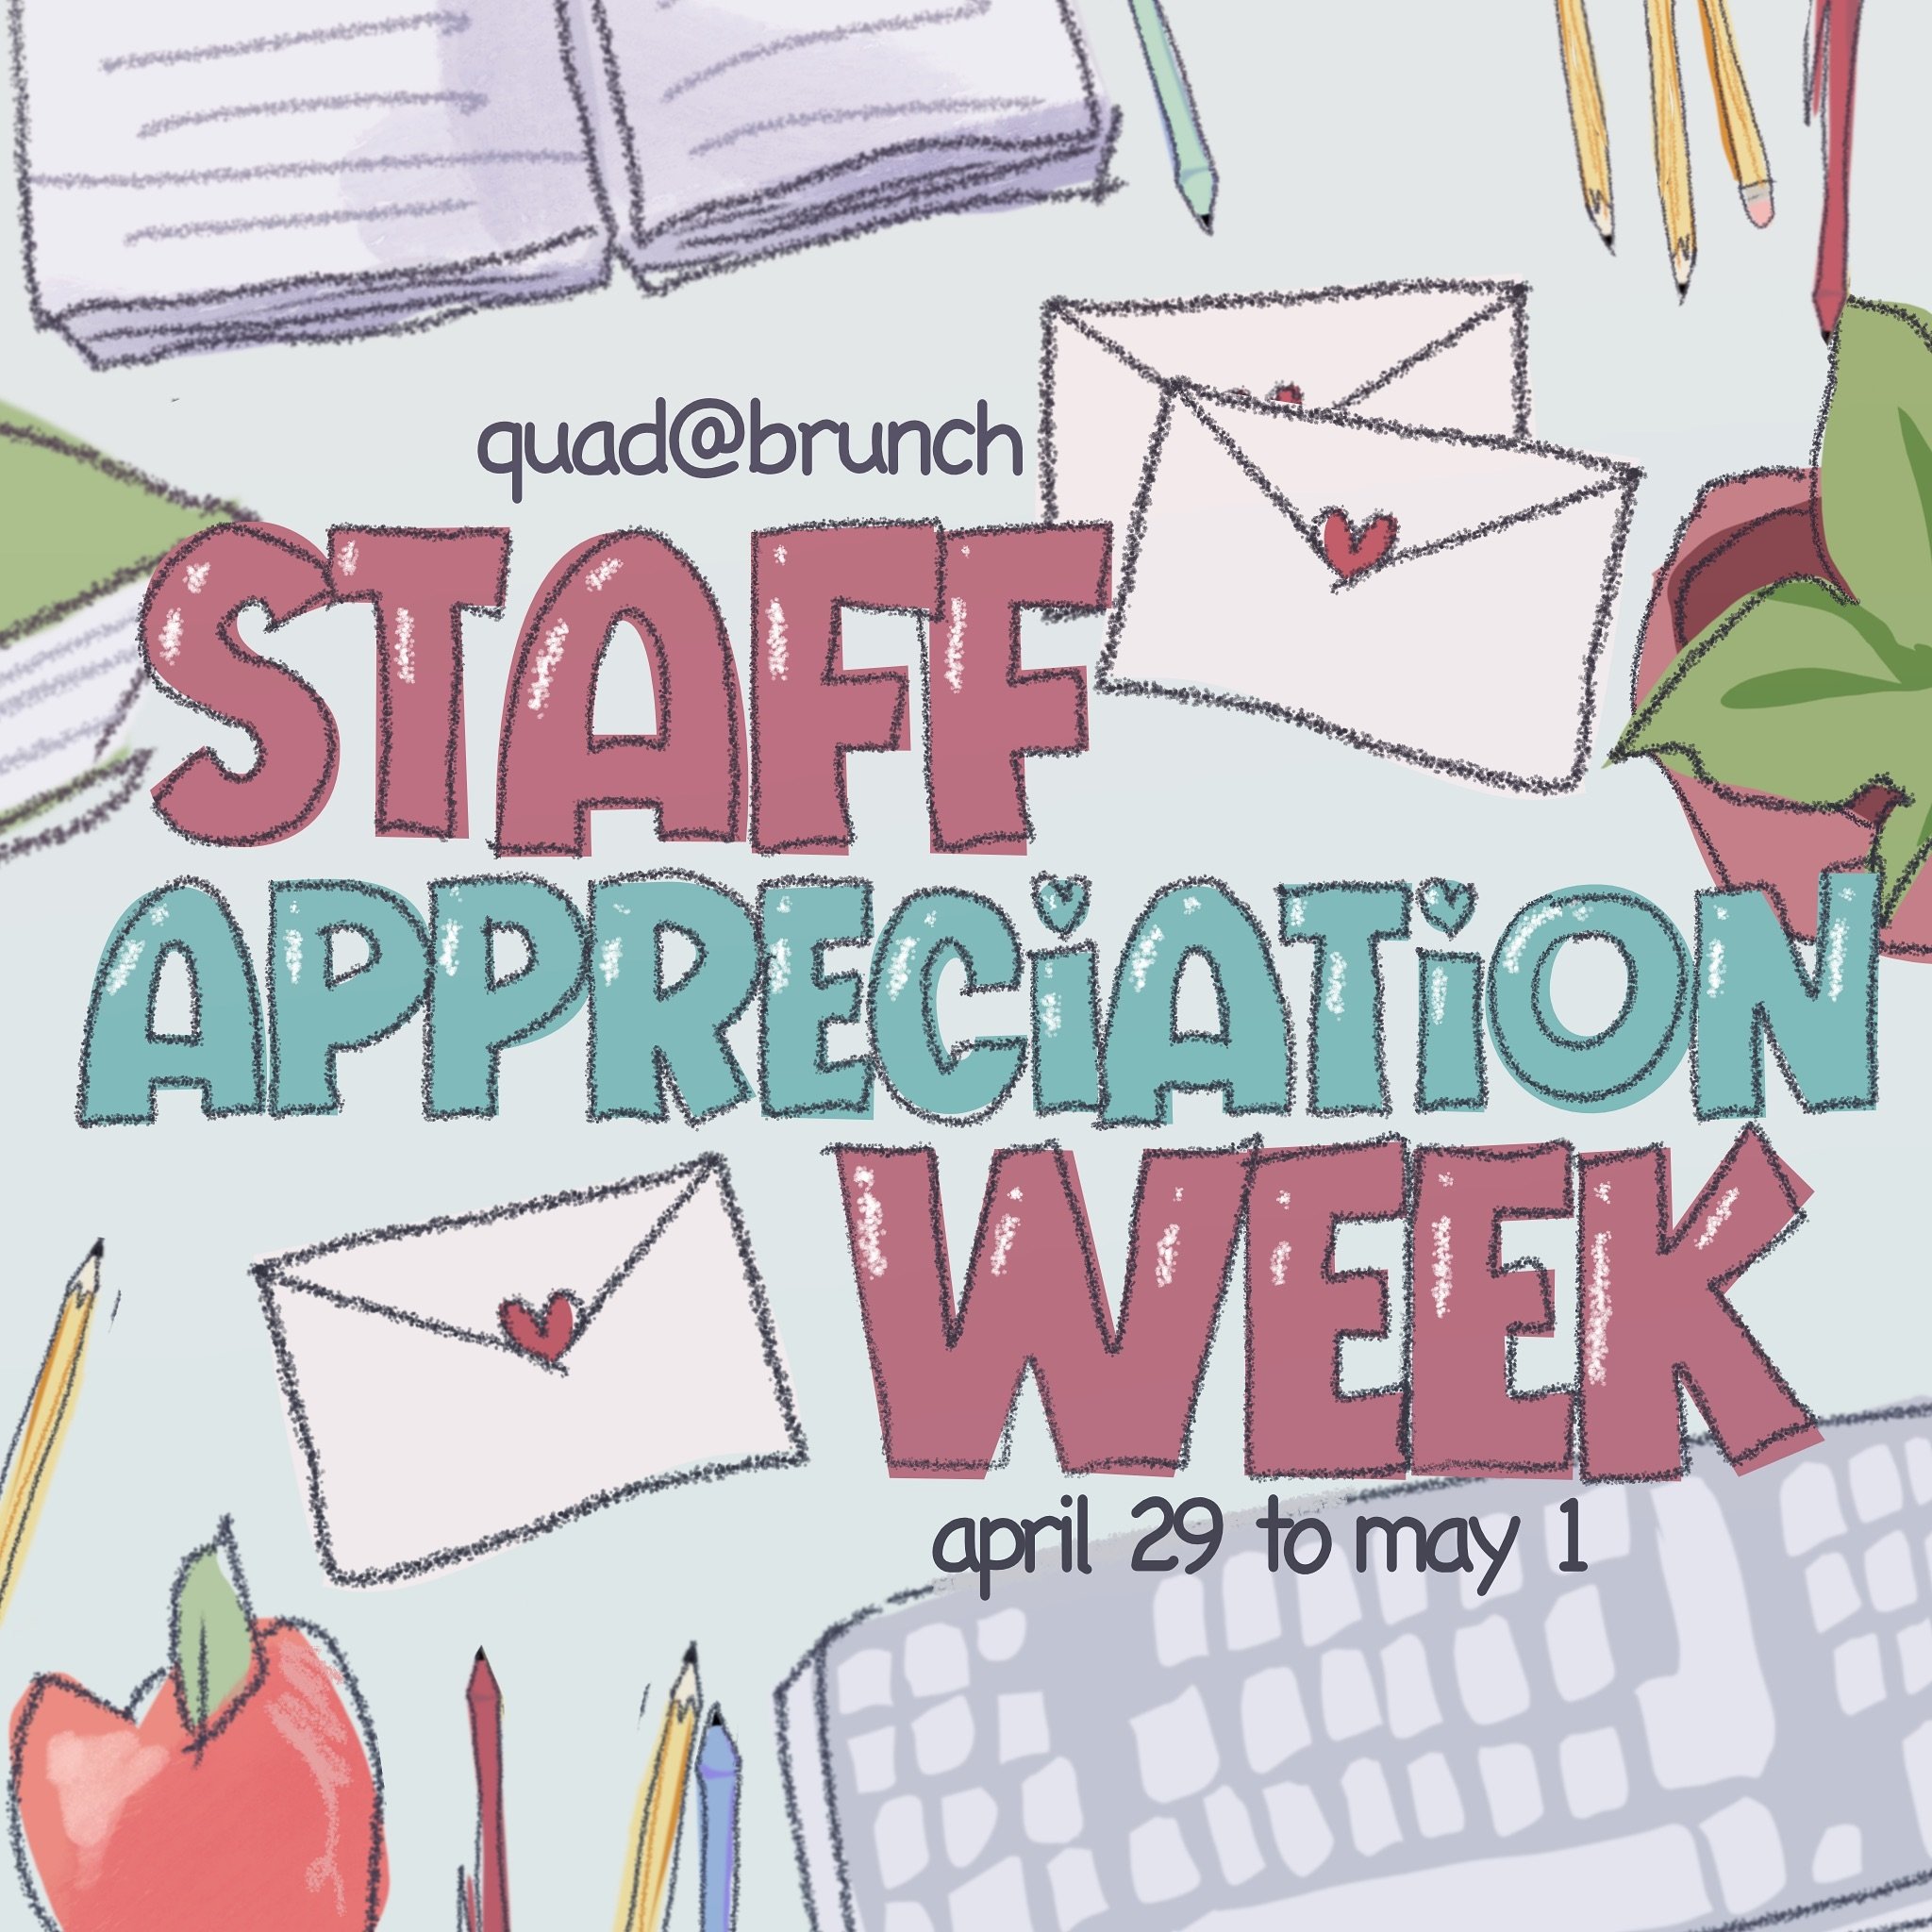 Hey Tino! In honor of Staff Appreciation Week, Campus Link Commission will be hosting card making in the quad. Come out to the quad during brunch on April 29th to May 1st, Monday through Wednesday, to make cards and show gratitude for your favorite s